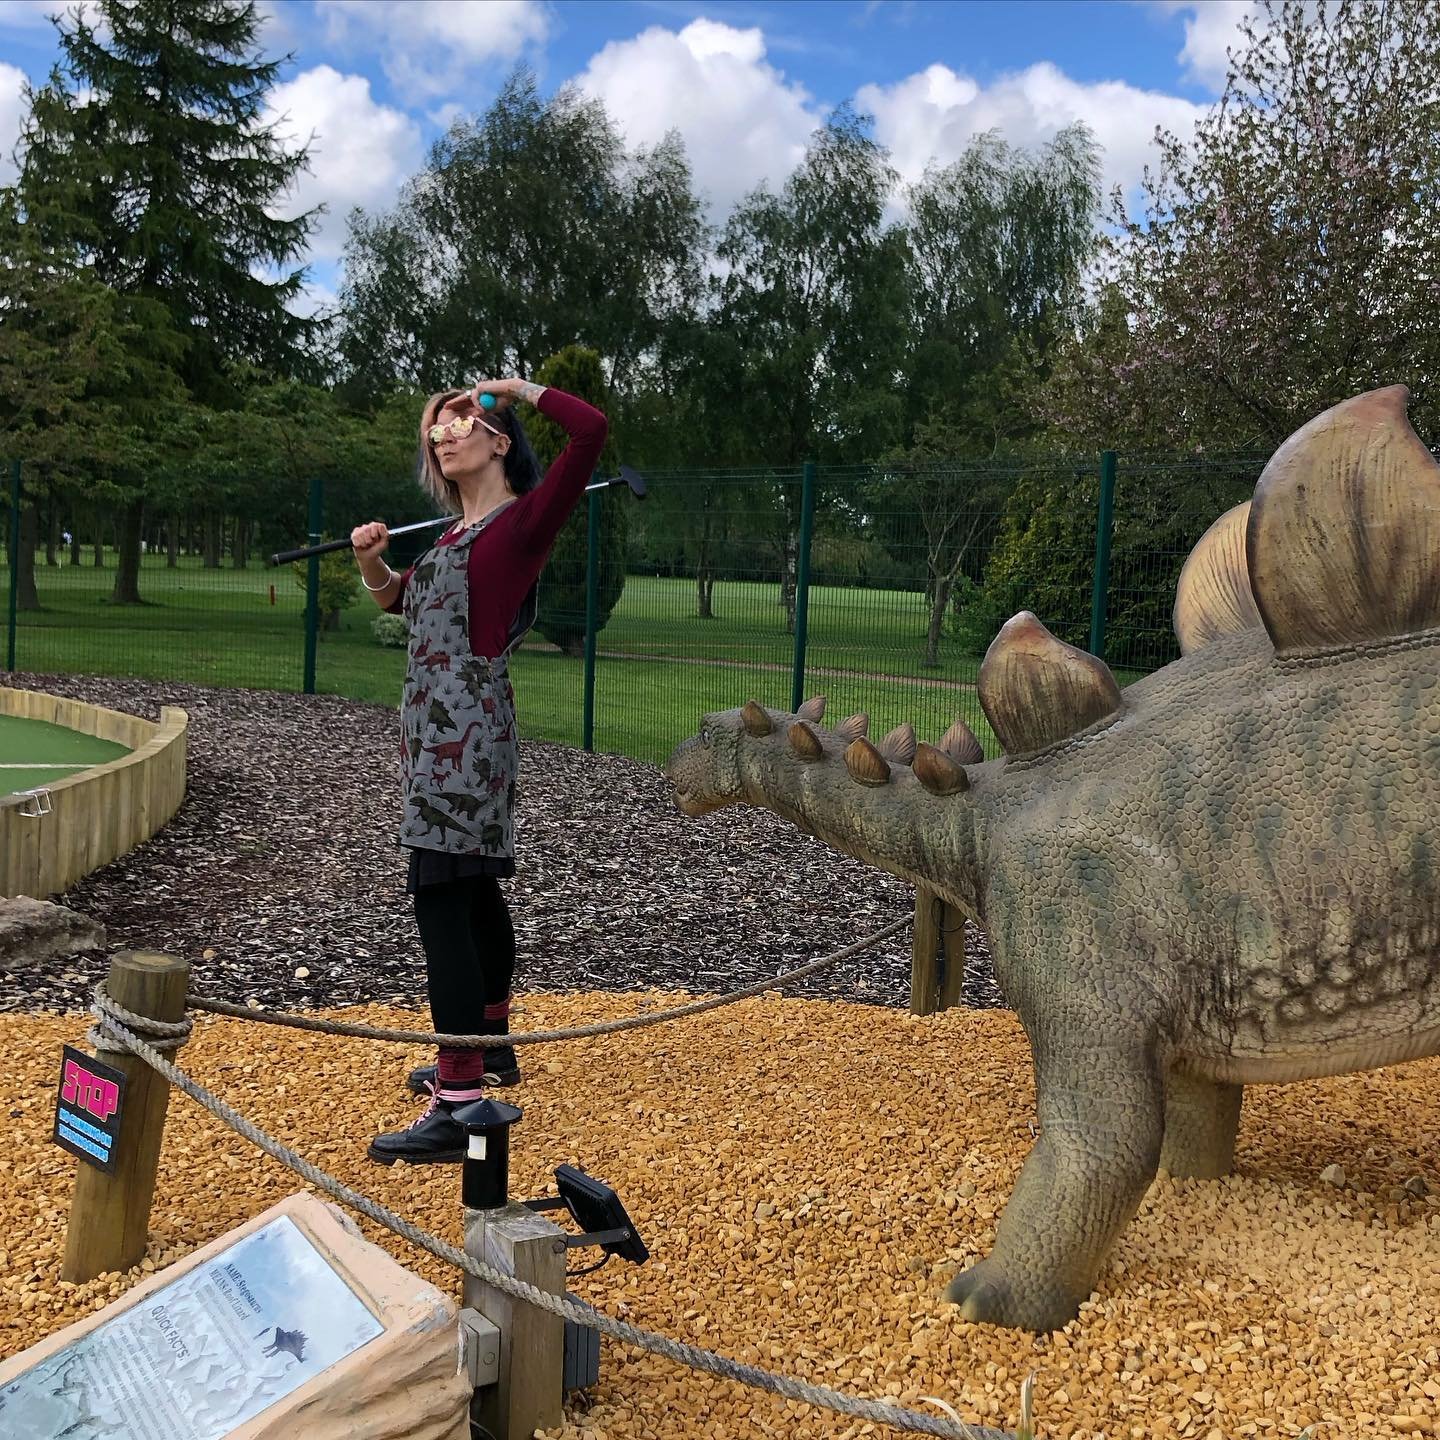 Golf pose with stegosaurus 😁❤️ Did you know in Wolvo there is not one but TWO dinosaur mini golfs?! I know!!! We had oodles of dino fun 🦖 x